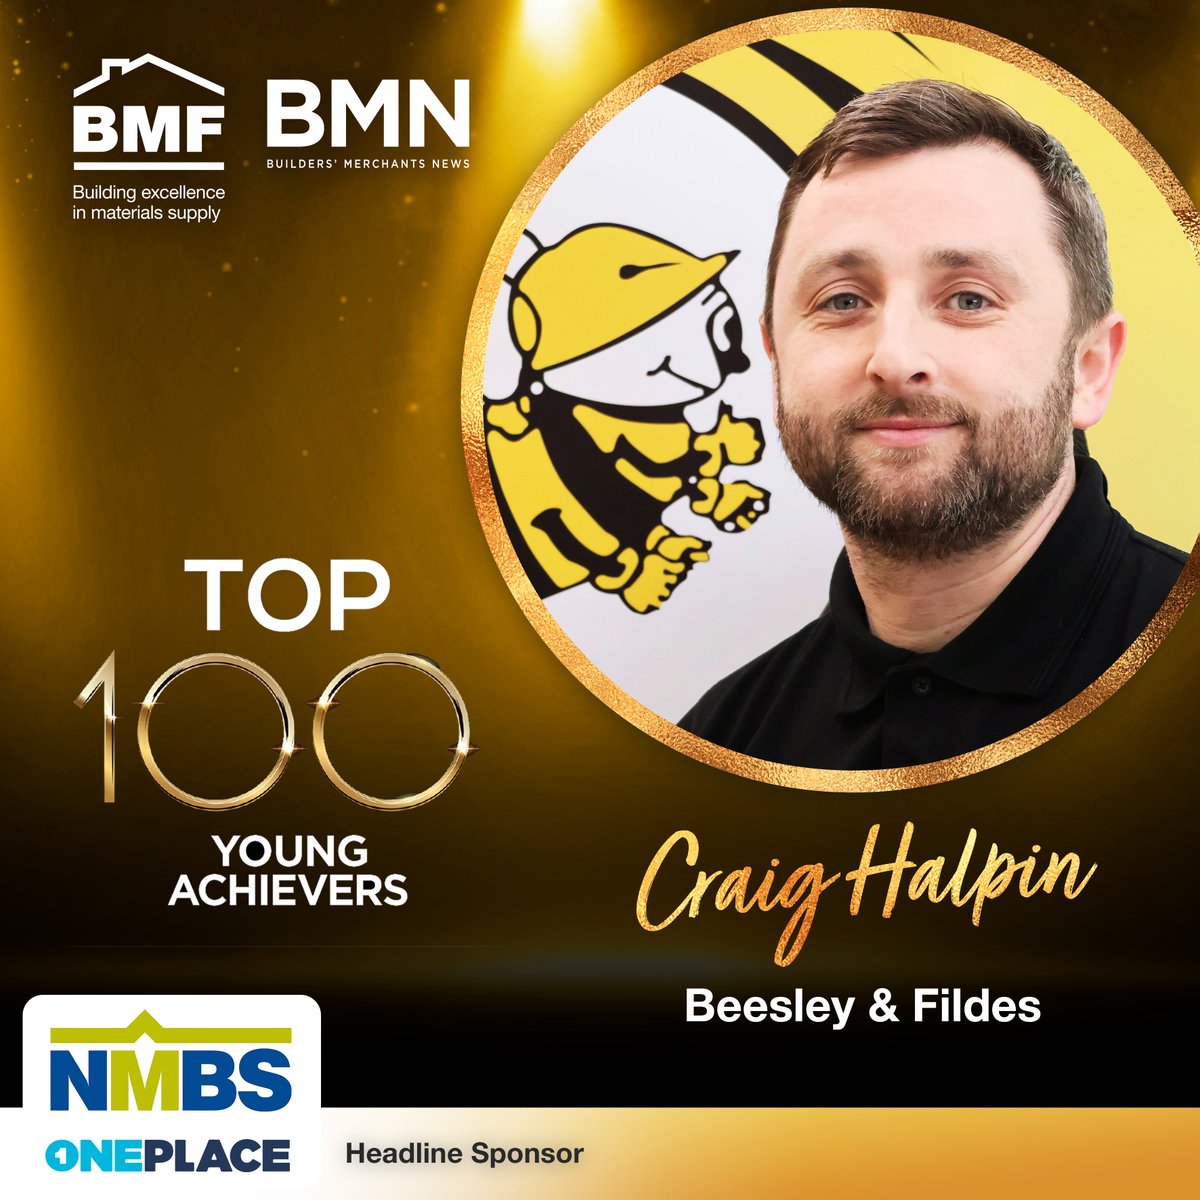 Today’s BMF and @BMerchantsNews Top 100 Young Achiever is Craig Halpin, Sales Manager at @beesleyandfilde Our Top 100 Young Achiever nominees are kindly sponsored by our head sponsor, @NationalMerch #Top100YoungAchiever